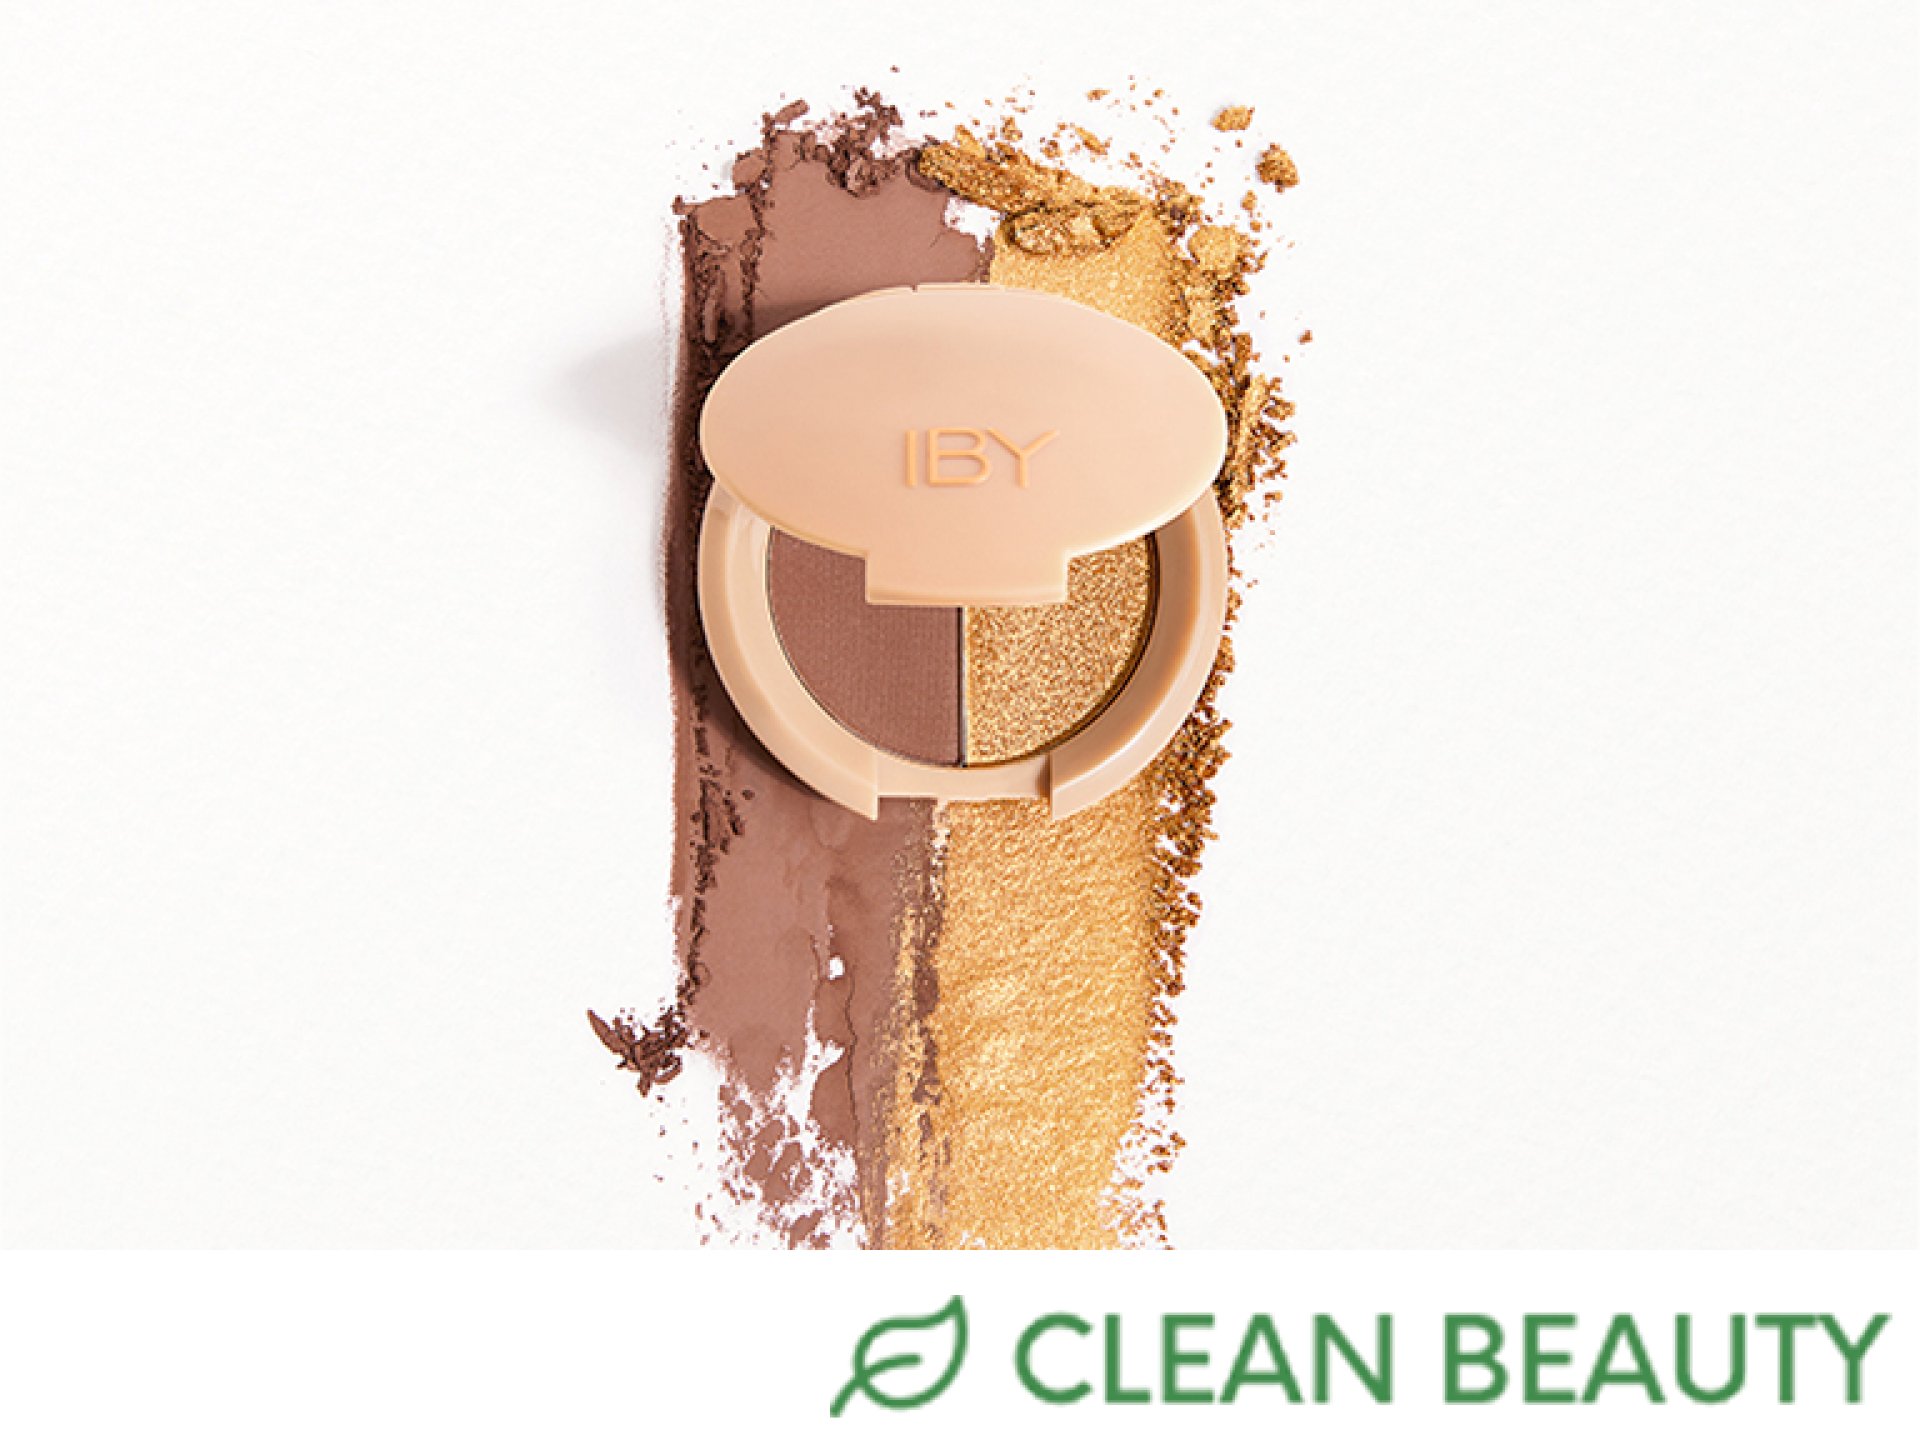 IBY BEAUTY Carry On 2 Face Palette - Glamping and First Class Eyeshadow